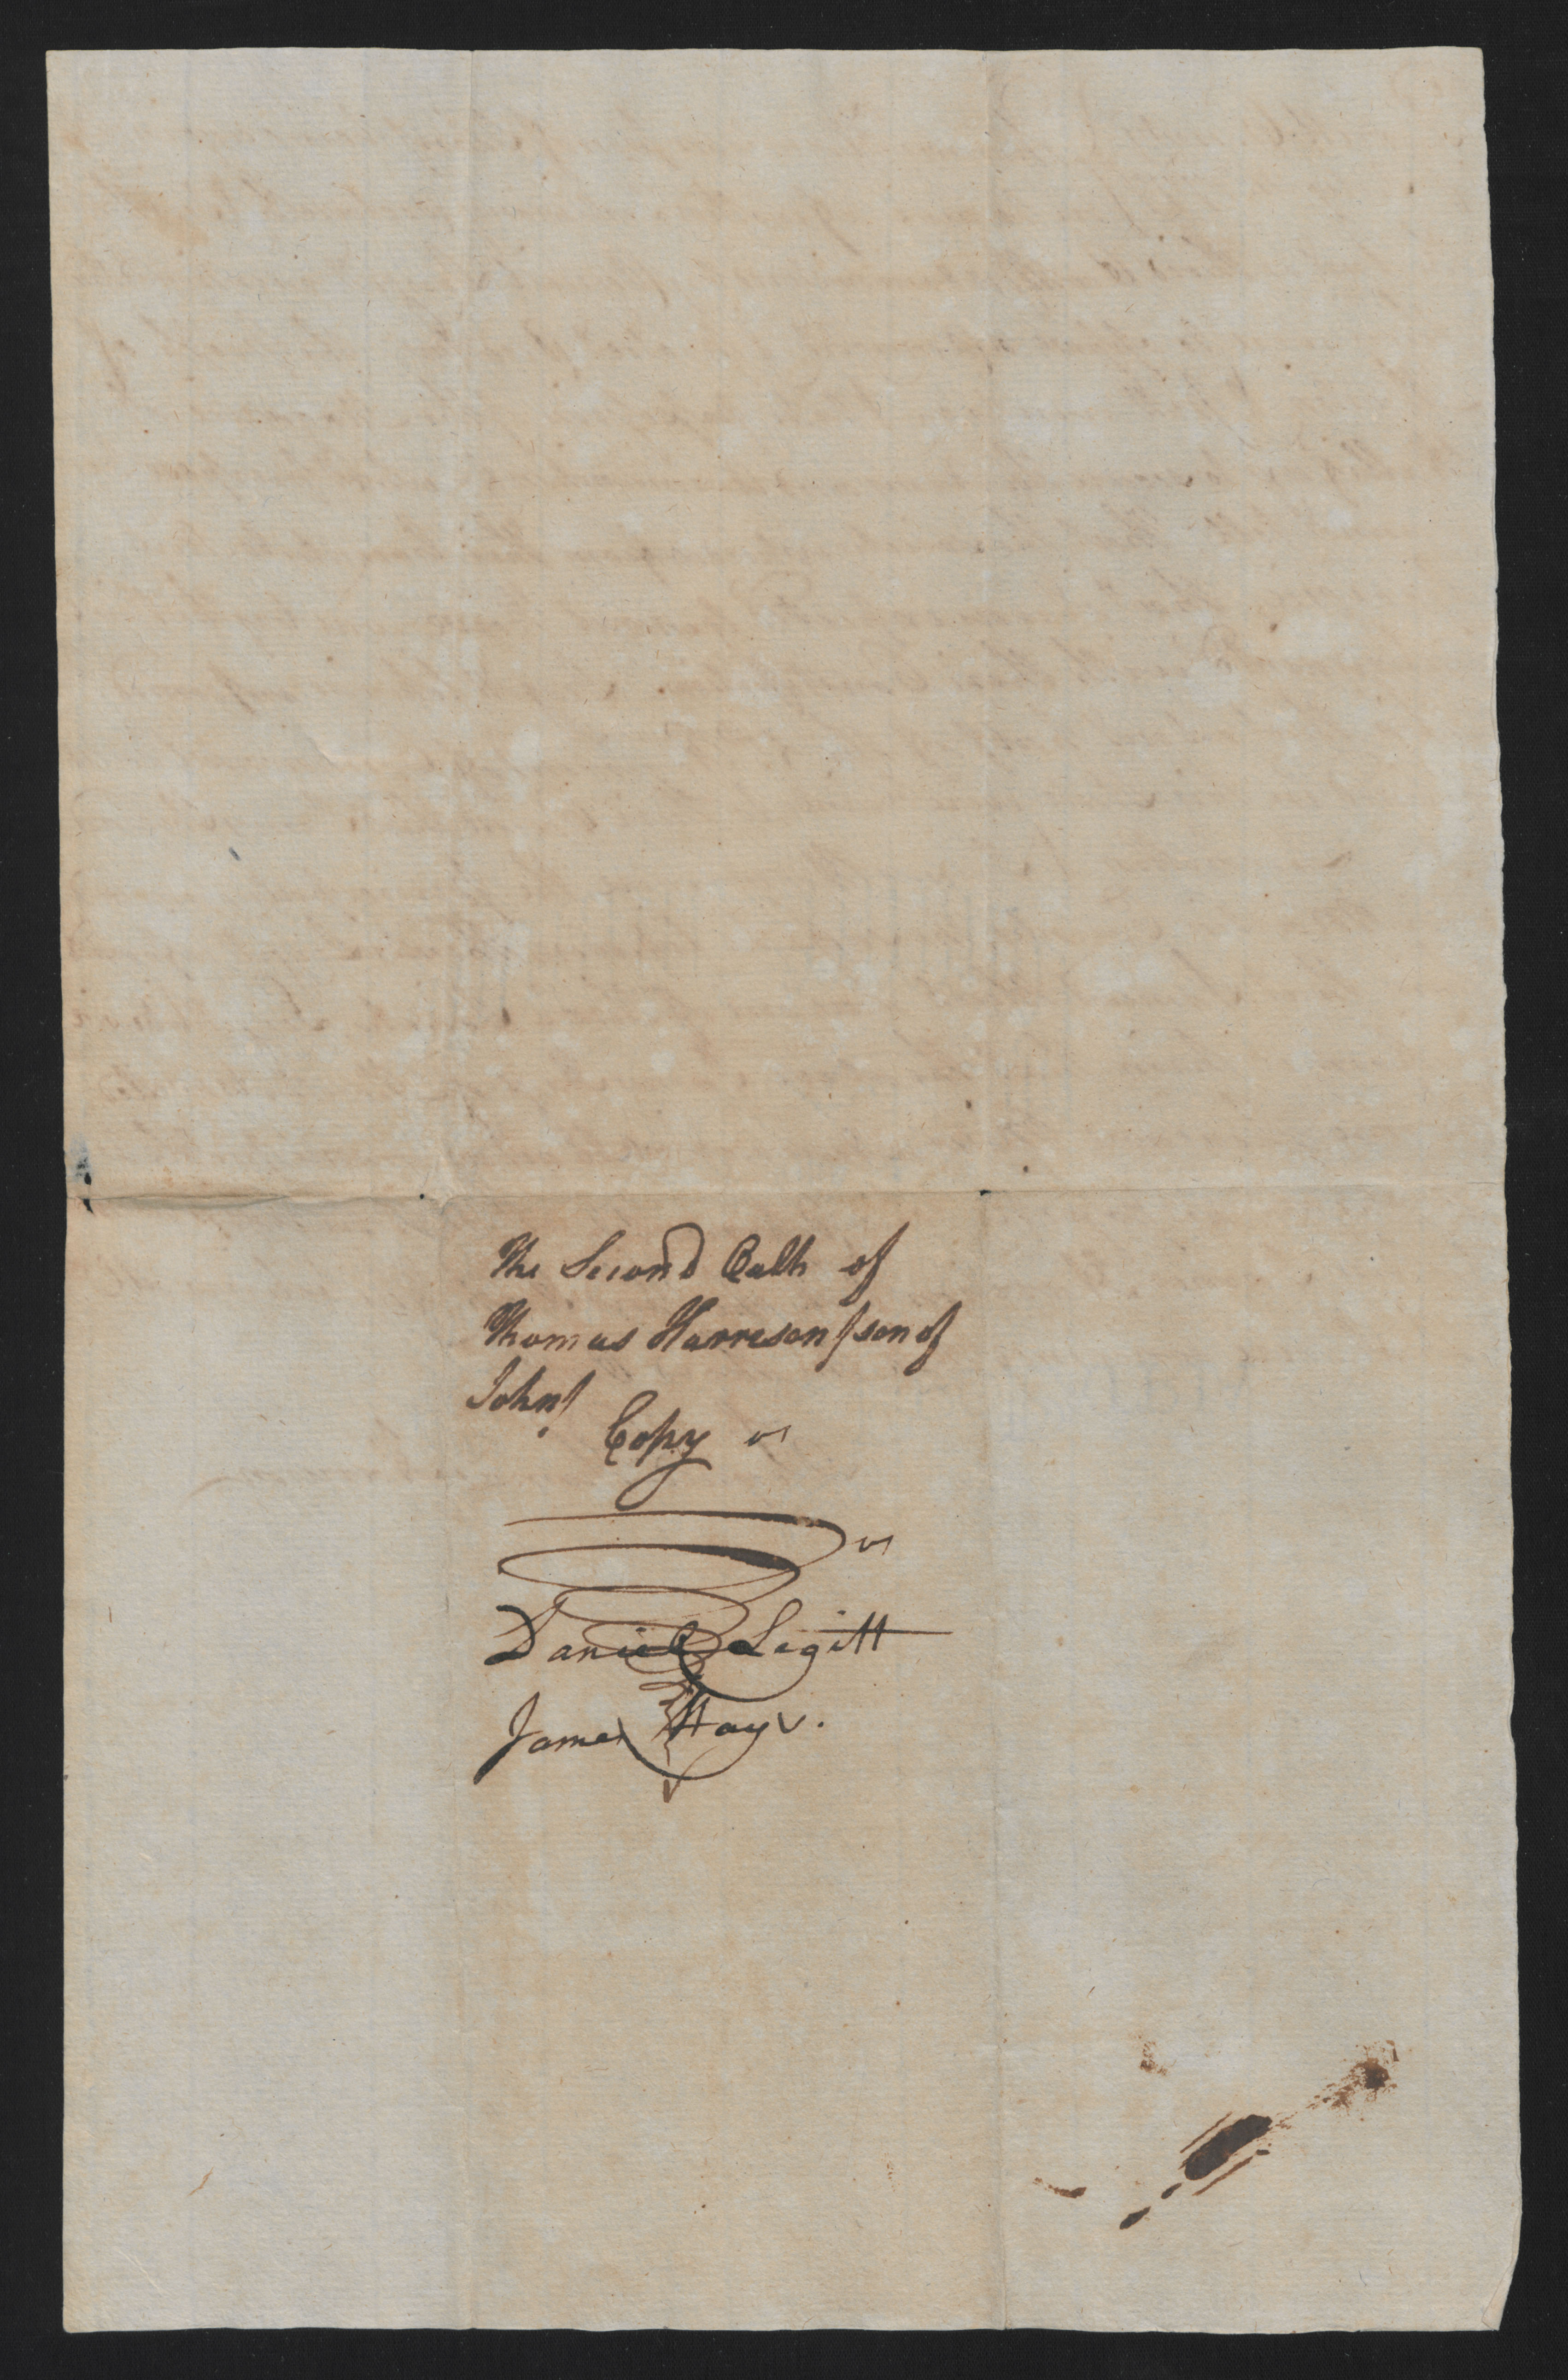 Deposition of Thomas Harrison Jr., 14 July 1777, page 2